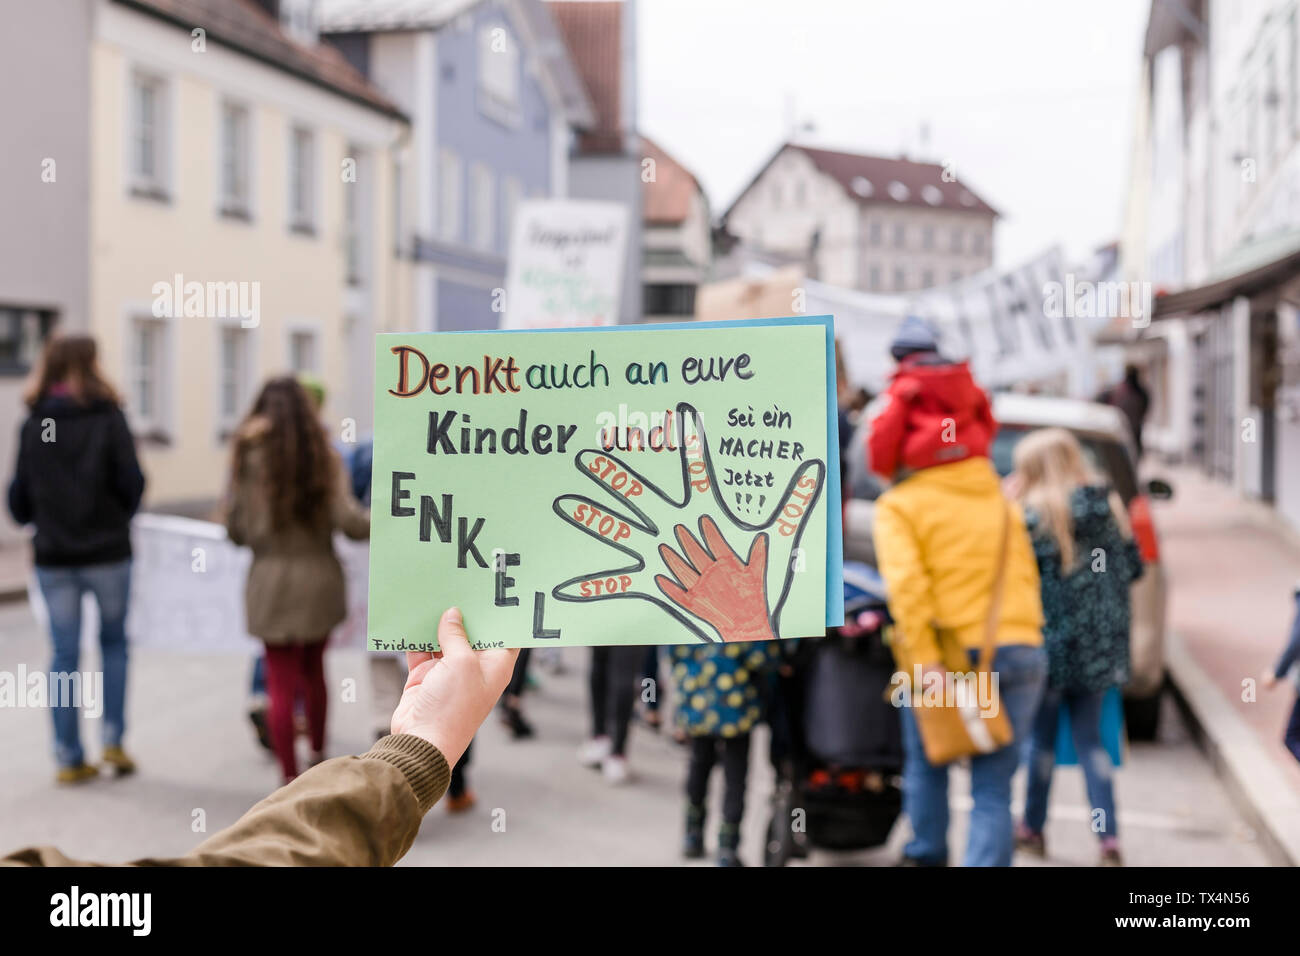 Hand holding a placard on a demonstration for environmentalism Stock Photo